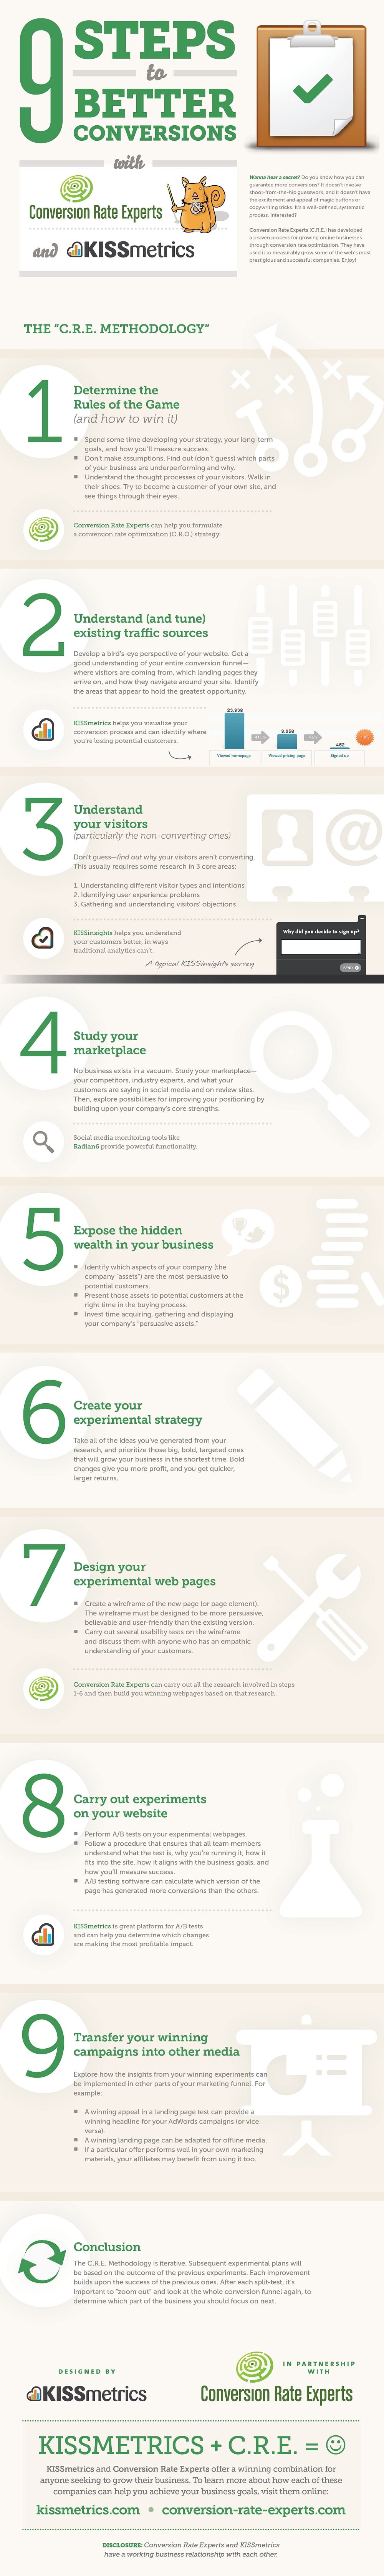 9 steps to better conversions - Infographic